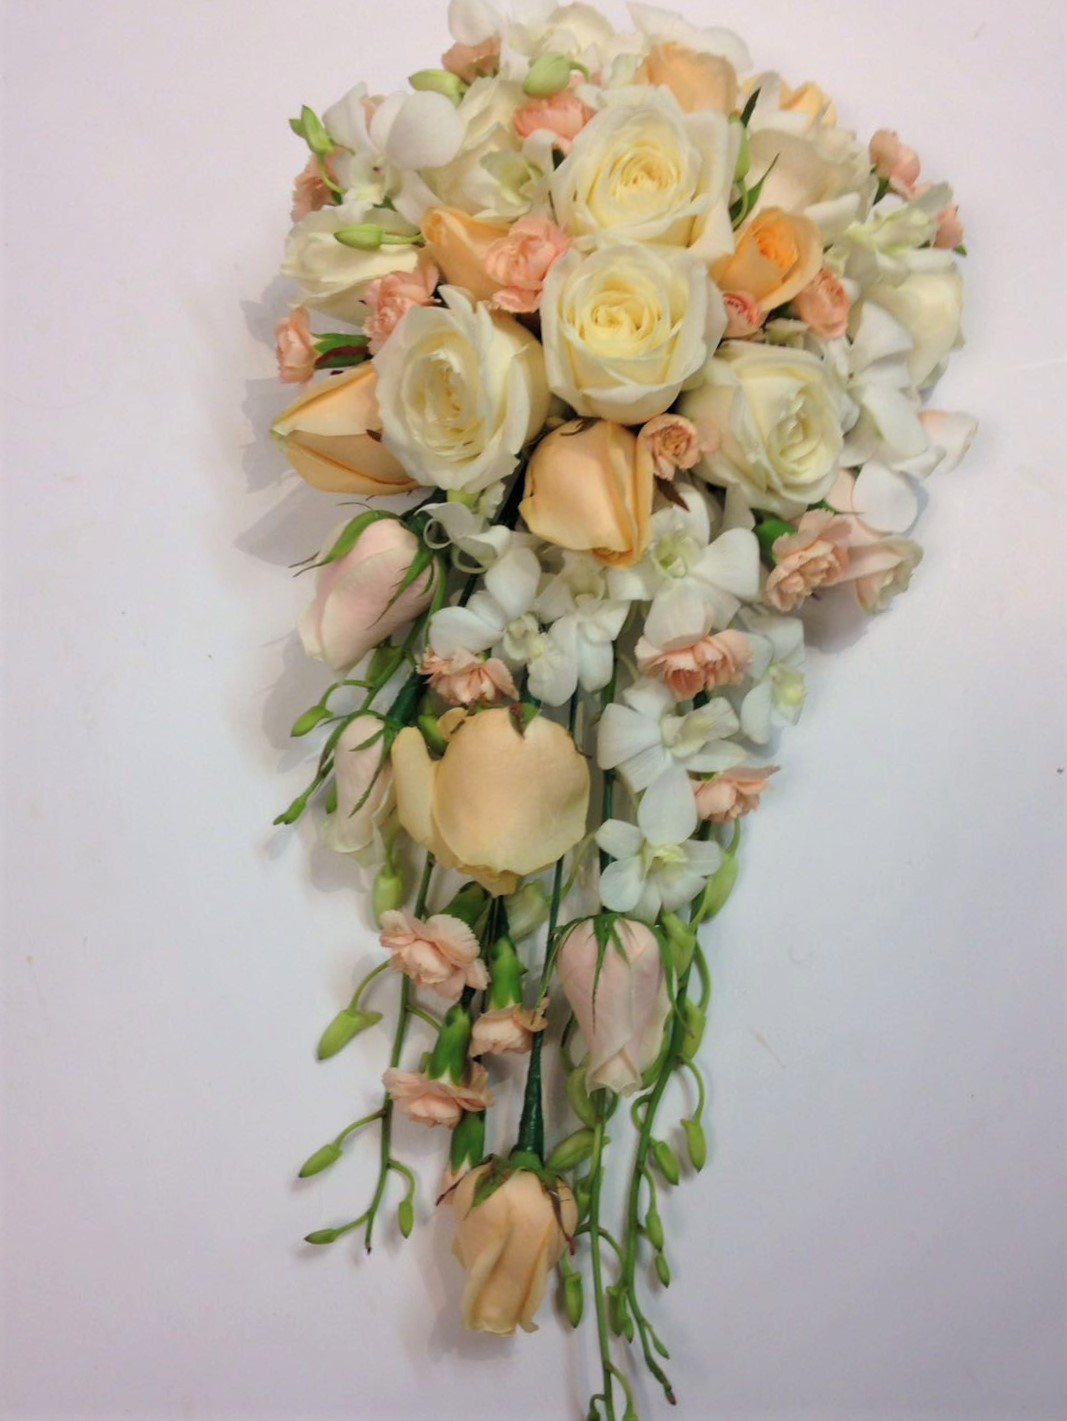 peach roses white rose and white freesia calla and singapore orchids shower wedding bouquet